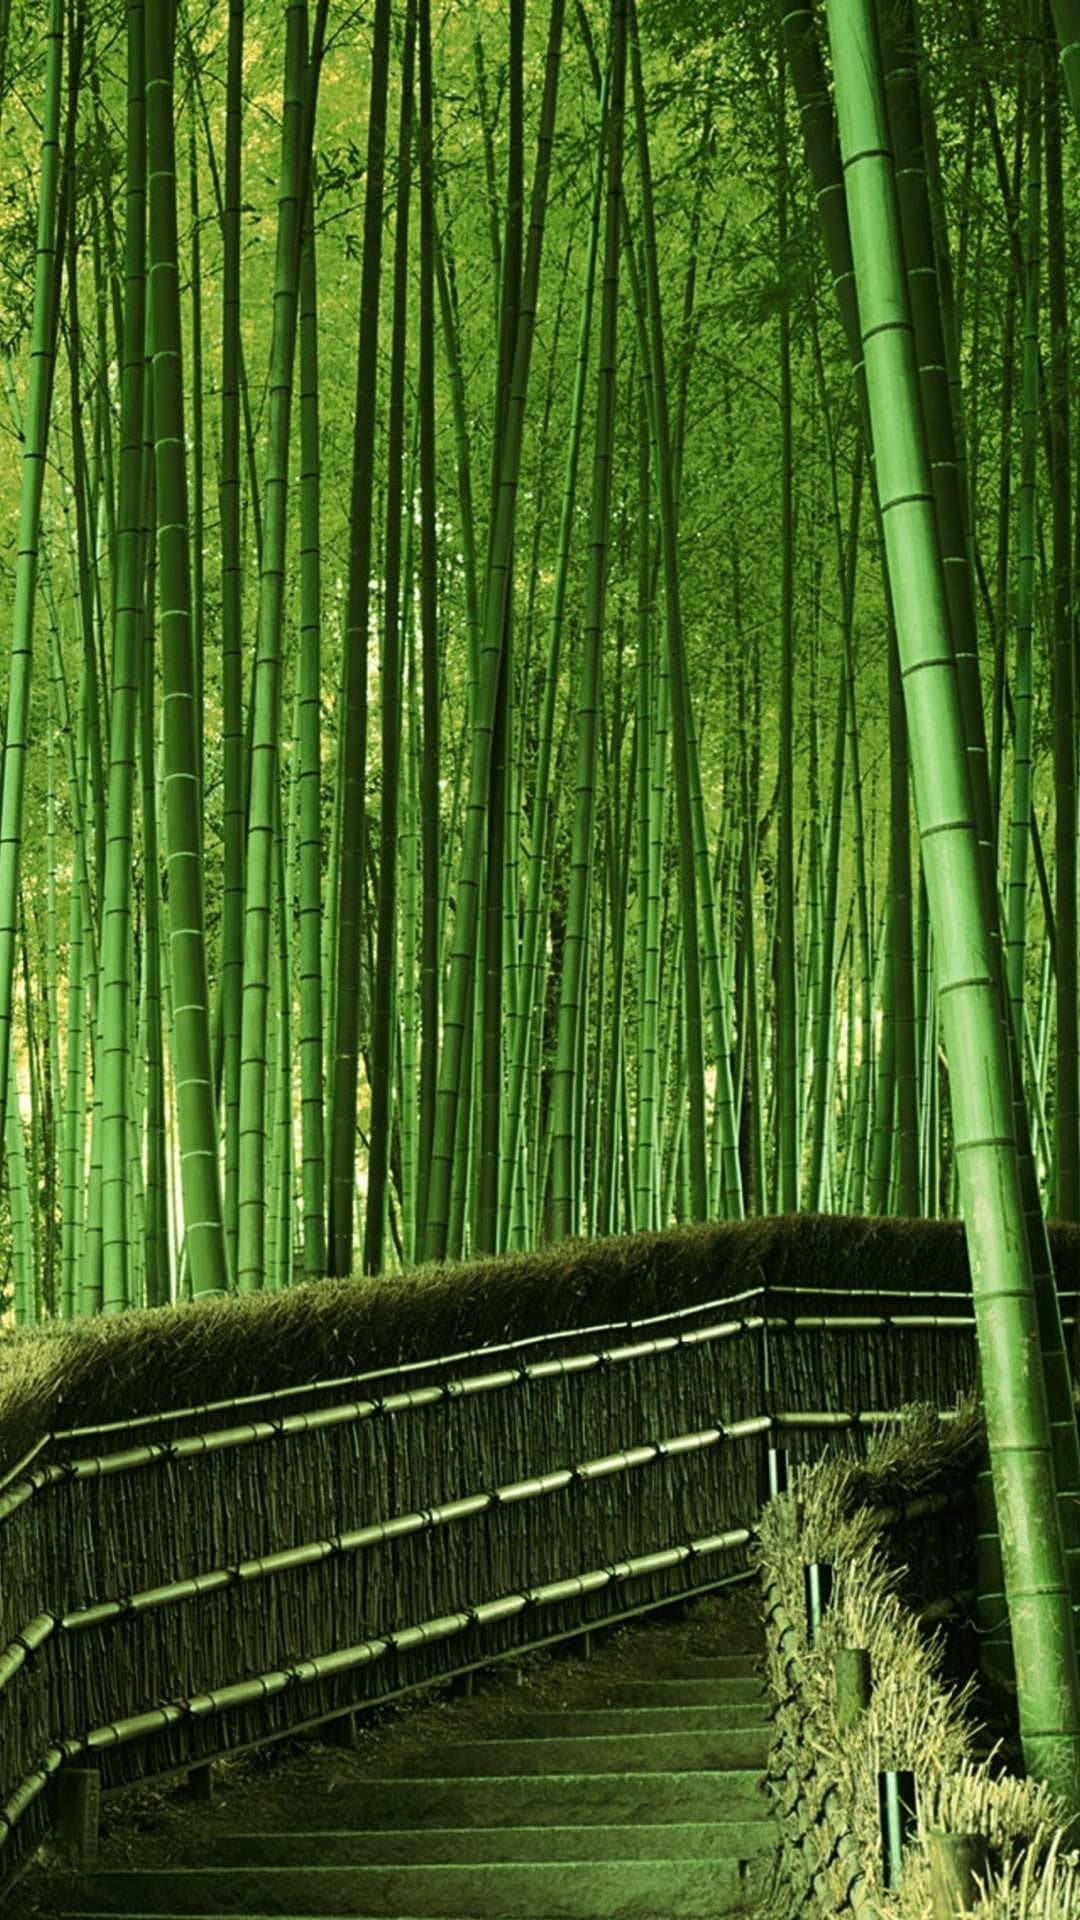 Full Bamboo Stair Path Iphone